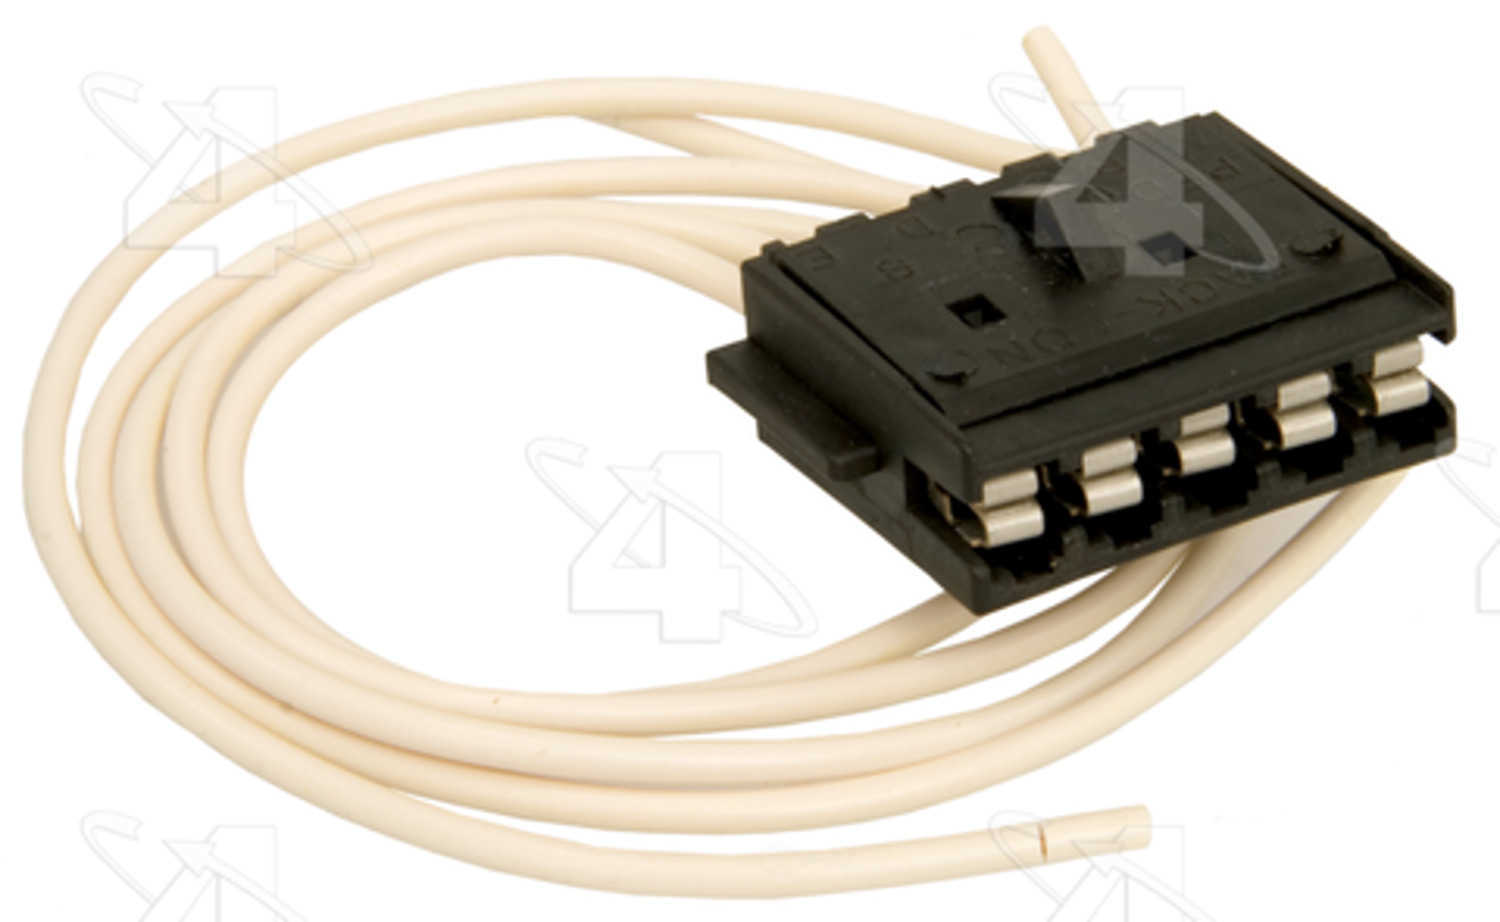 FOUR SEASONS - A/C Compressor Time Delay Relay Harness Connector - FSE 37208